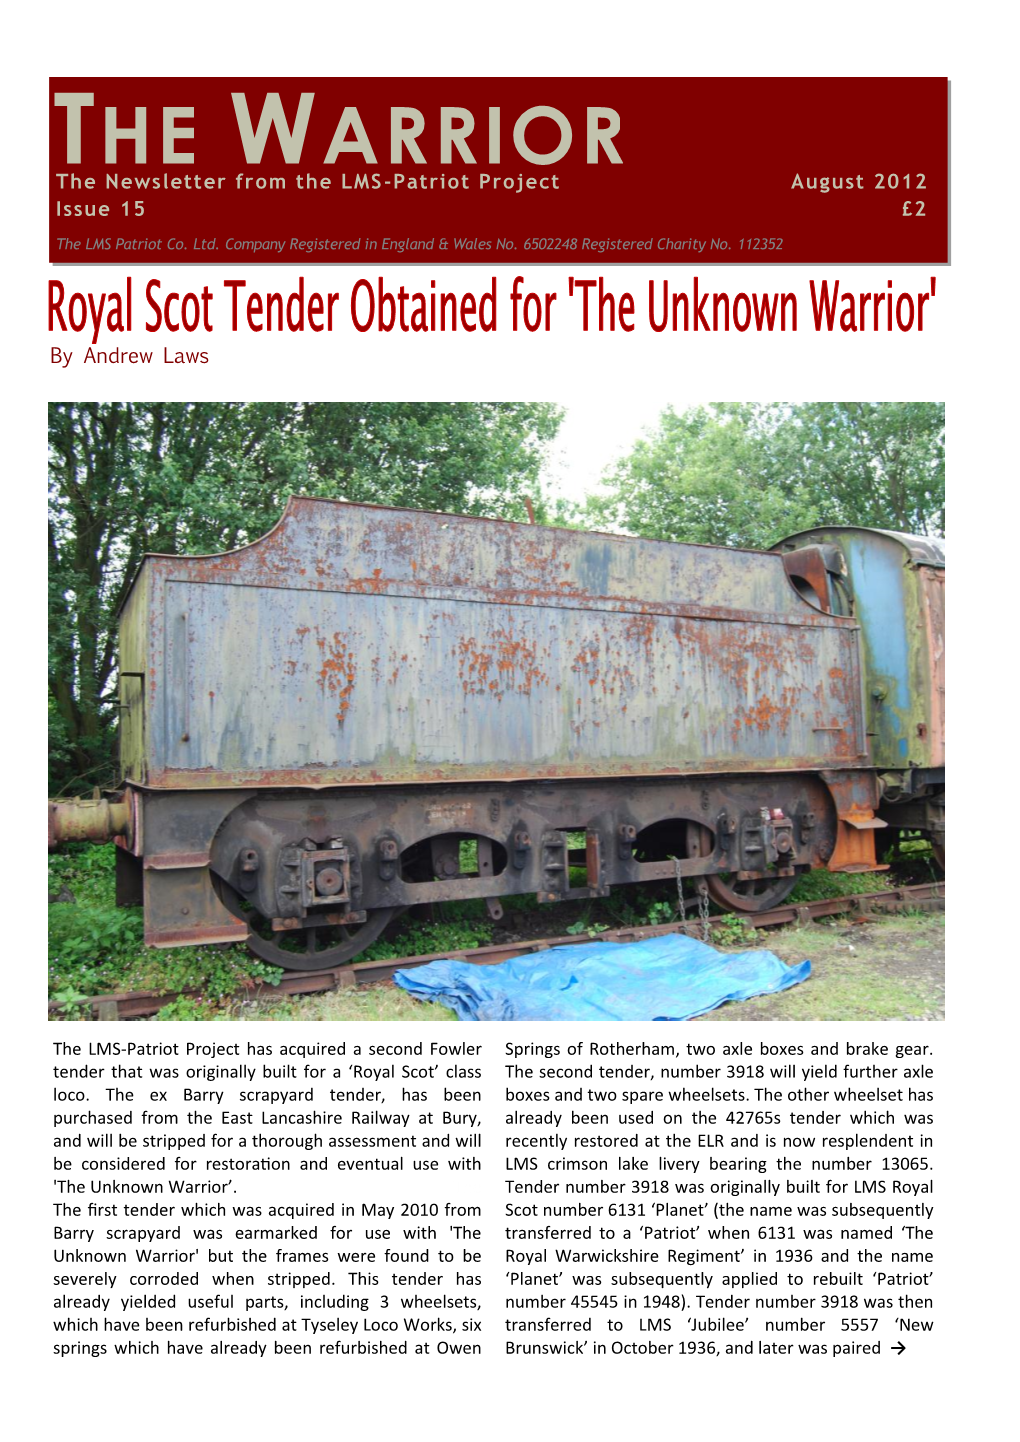 THE WARRIOR the Newsletter from the LMS-Patriot Project August 2012 Issue 15 £2 the LMS Patriot Co